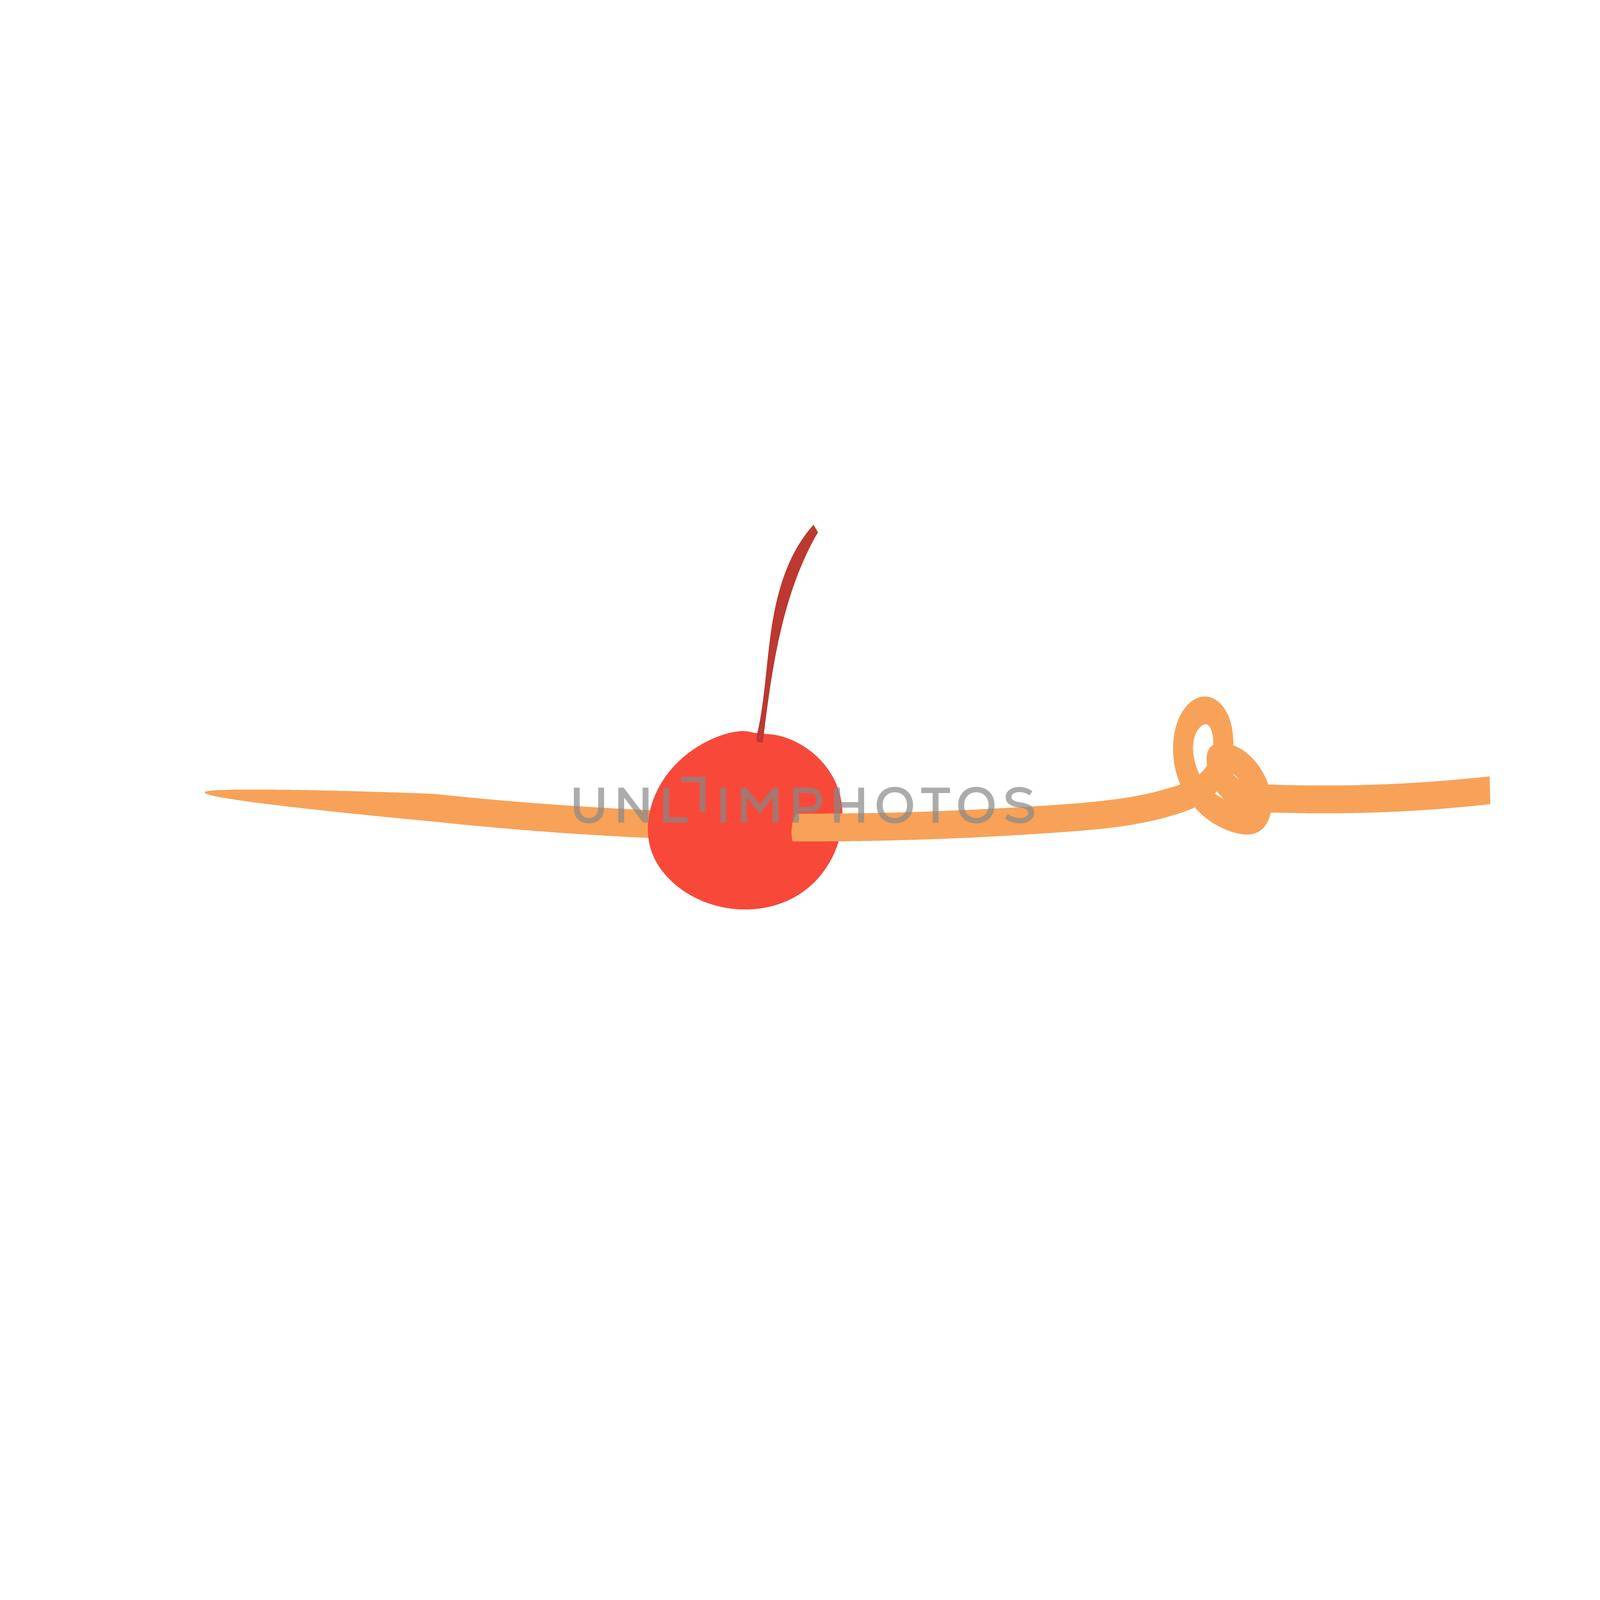 Cocktail skewer or cocktail stick isolated illustration. Sugar cherry on a skewer icon on white